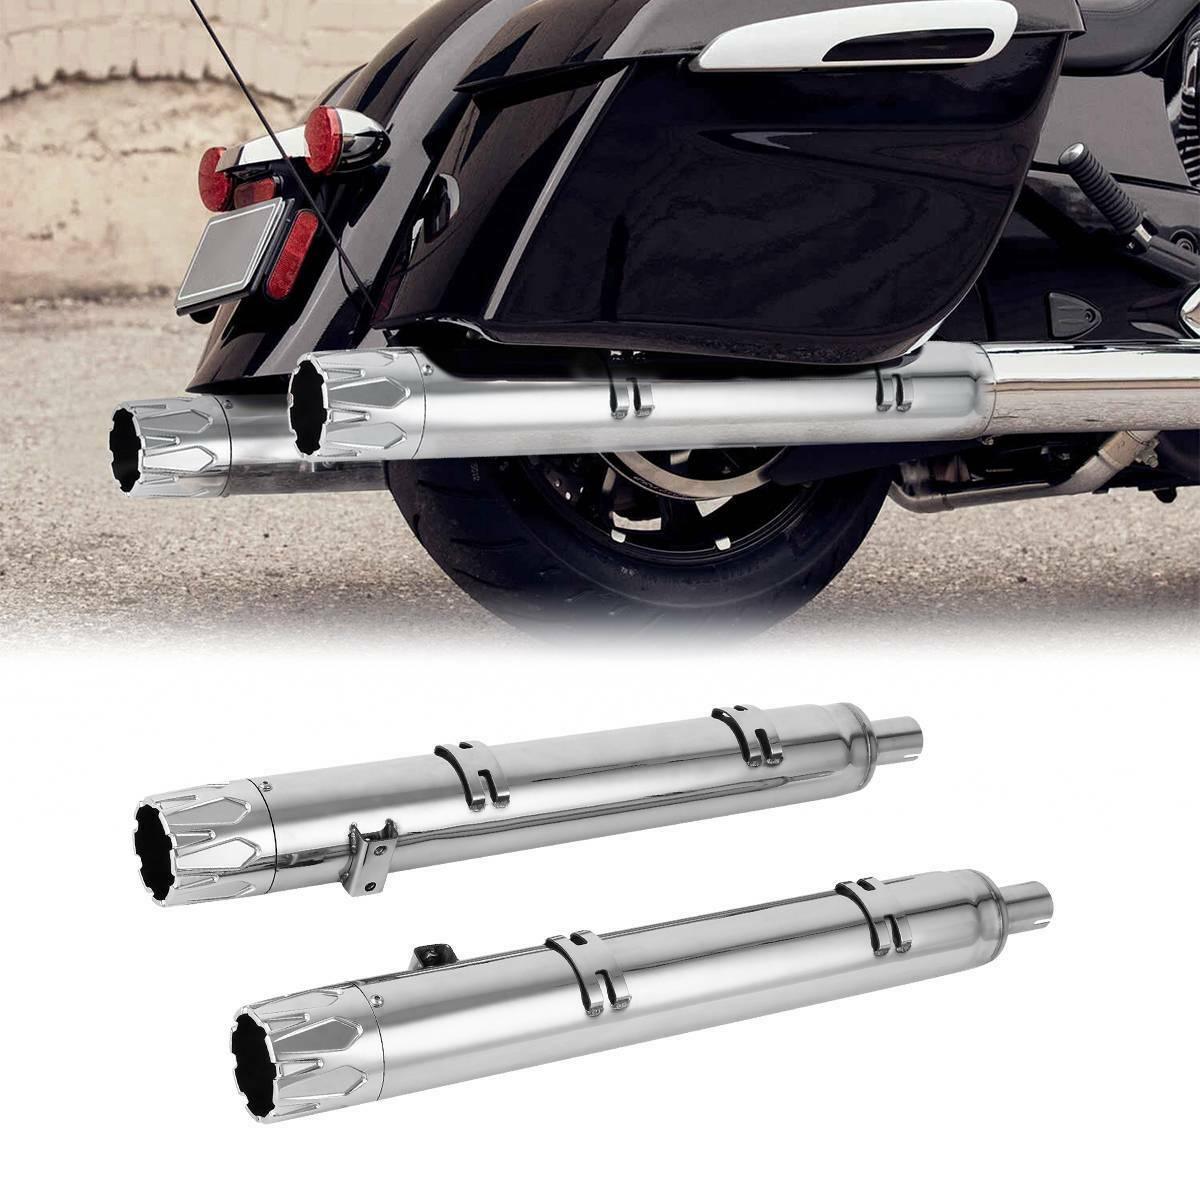 Muffler Exhaust Pipes Fits For Indian Chieftain Roadmaster Springfield 2014-2021 - Moto Life Products